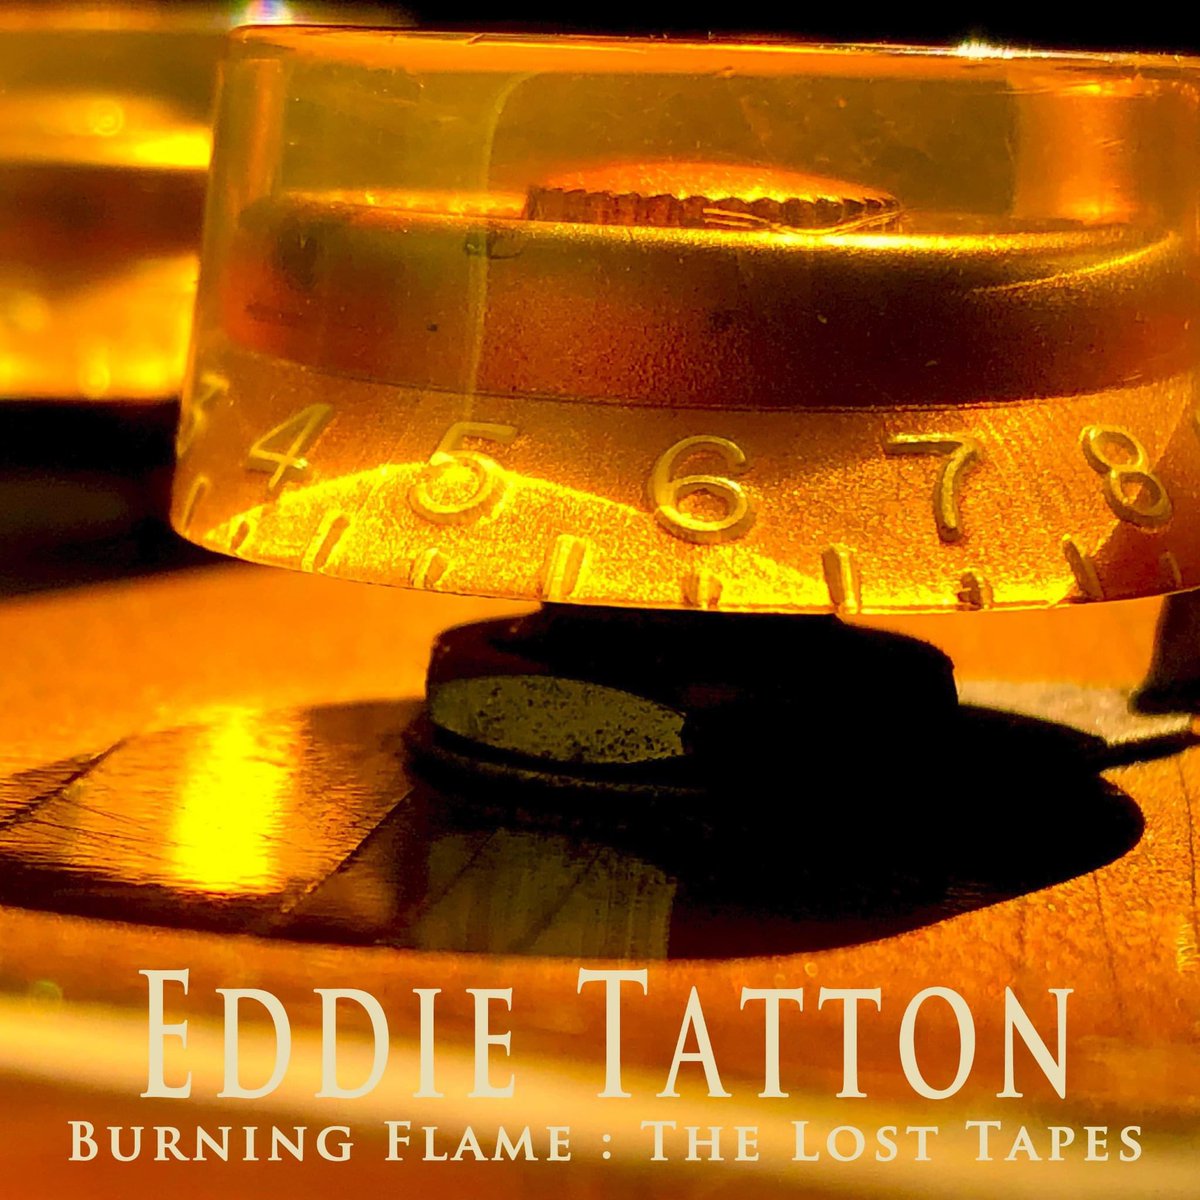 Eddie Tatton's new mini album, Burning Flame, official 6 track release digitally is this Friday 26th Aug - physical CD available to order now from Stunted Records Bandcamp page Link below for title track video @Eddie_Tatton m.youtube.com/watch?fbclid=I… #newmusic #guitar